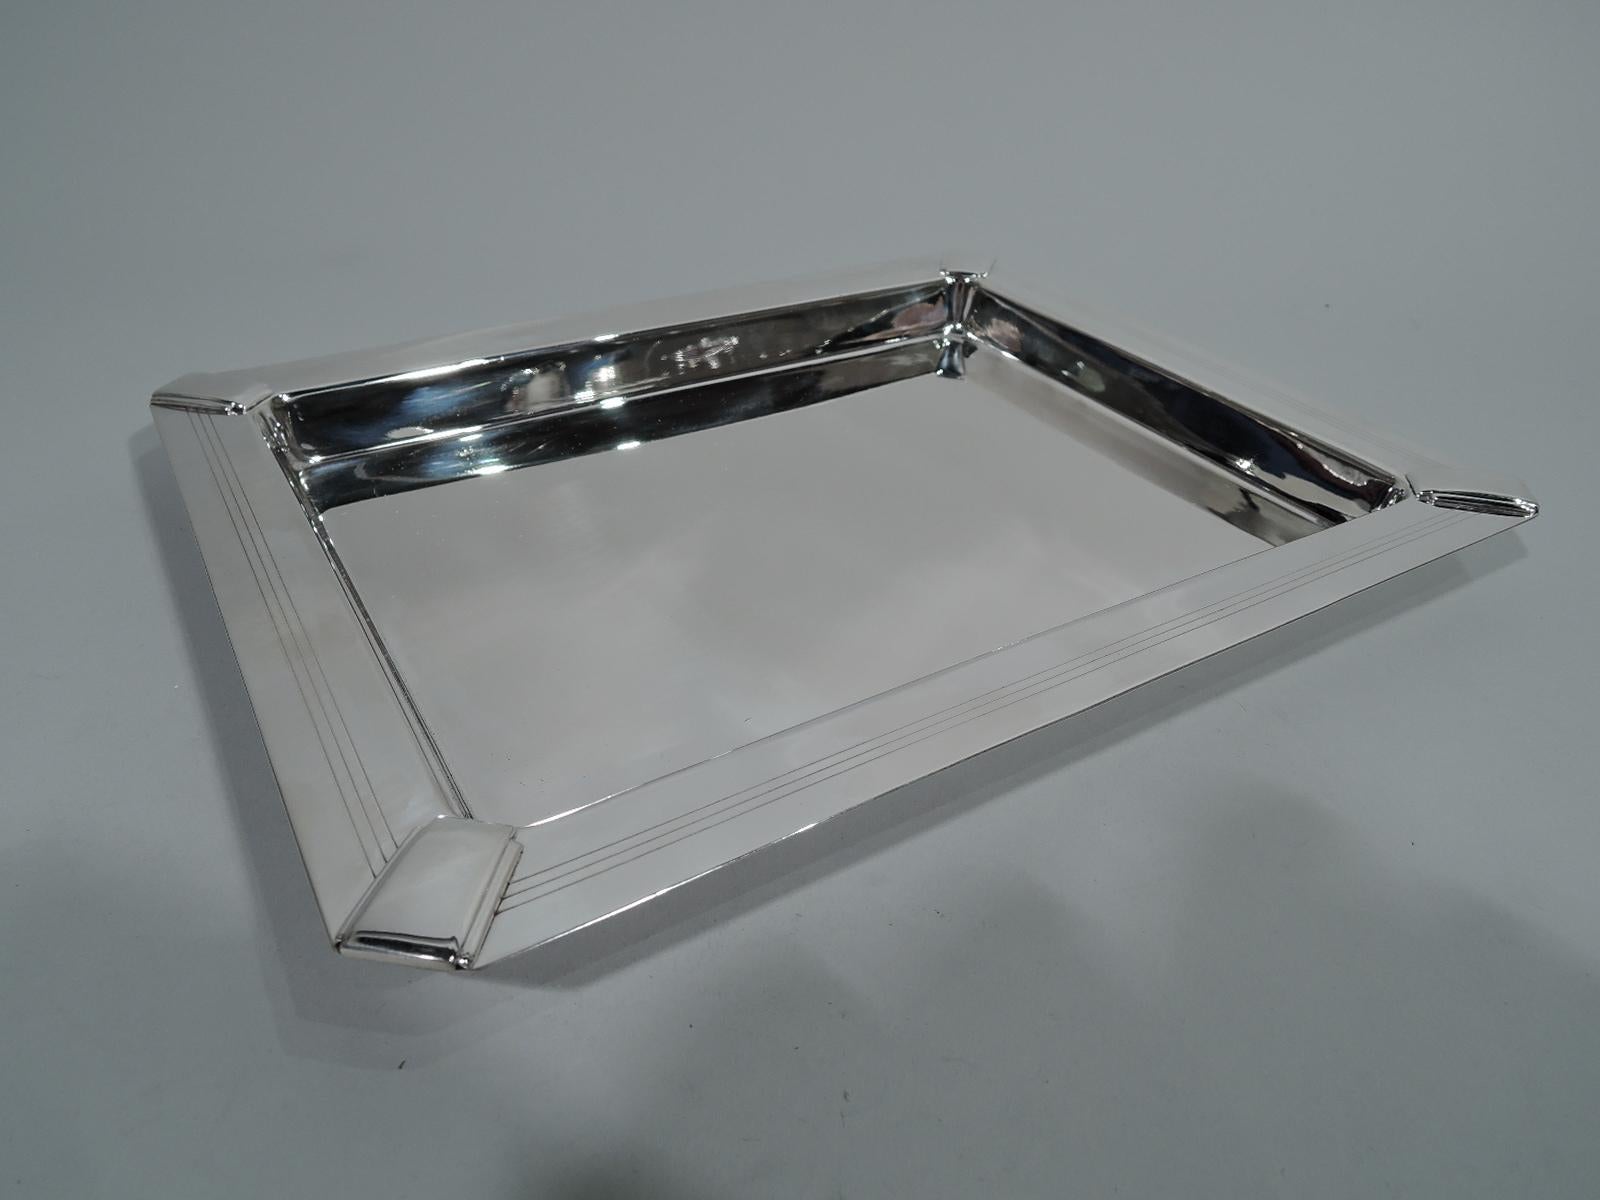 Retro-style sterling silver rectangular tray. Retailed by Tiffany & Co. in New York. Deep rectangular well with chamfered corners. Wide and flat rim with engraved wraparound rim and skyscraper motif applied to corners. Stylish Art Deco revival.